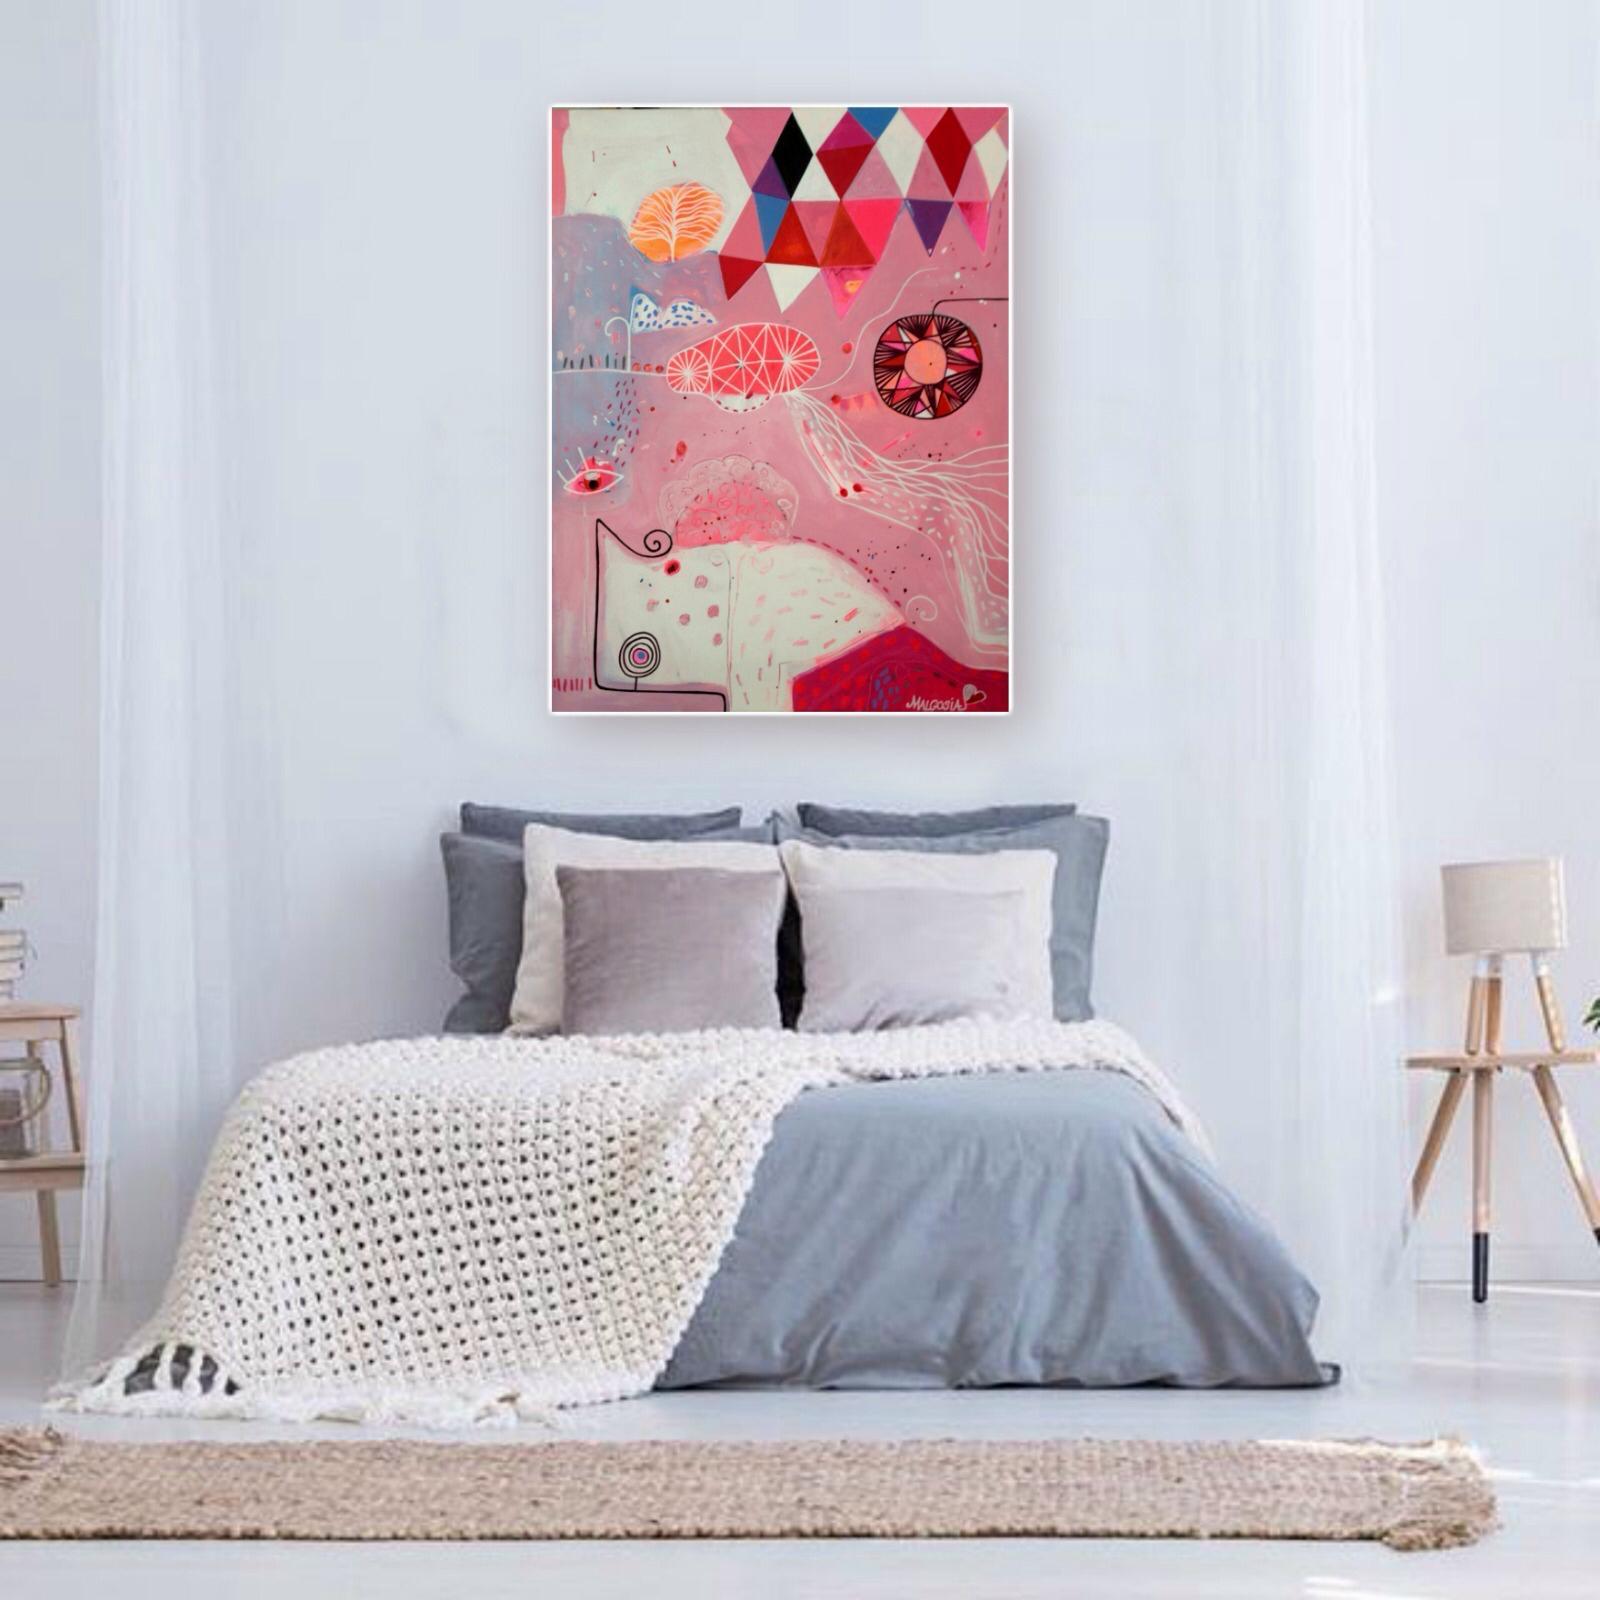 Queen Of Pink Night Figurative Abstract  - Painting by Malgosia Kiernozycka